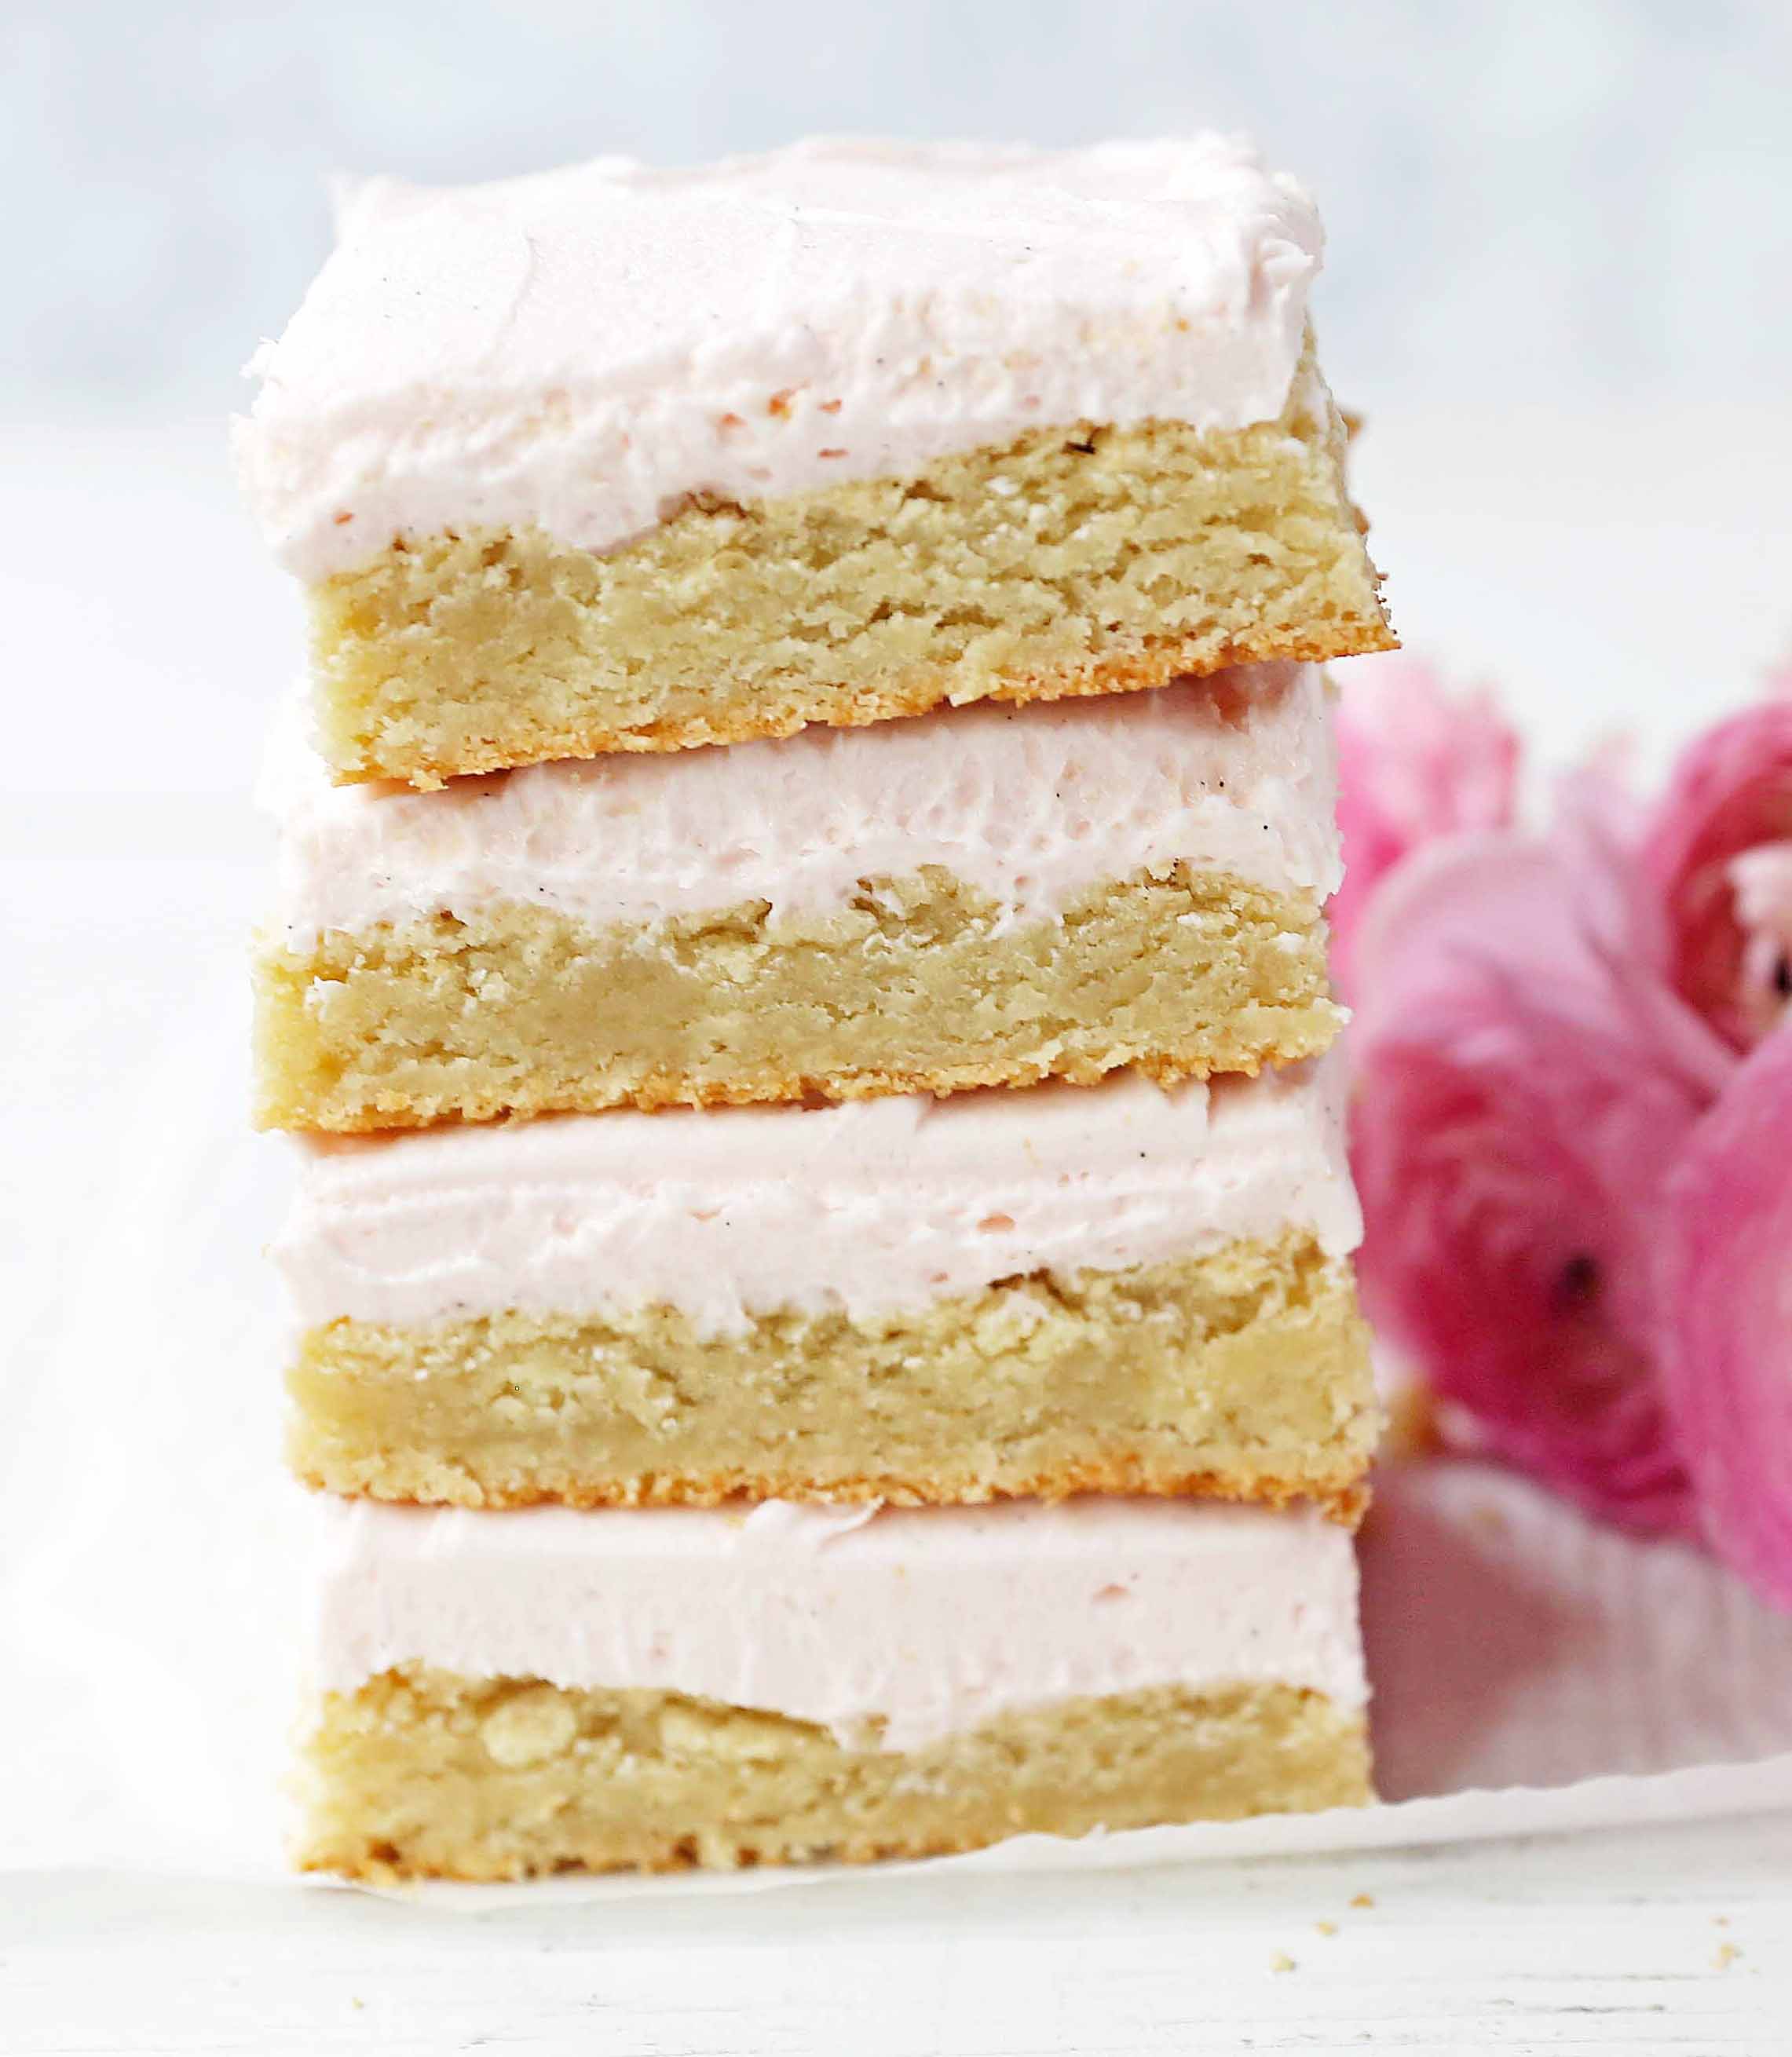 Sugar Cookie Bars. Soft and chewy sugar cookie bars with a sweet cream cheese frosting.  The perfect sugar cookie bar recipe! www.modernhoney.com #sugarcookiebars #frostedsugarcookiebars #sugarcookies 